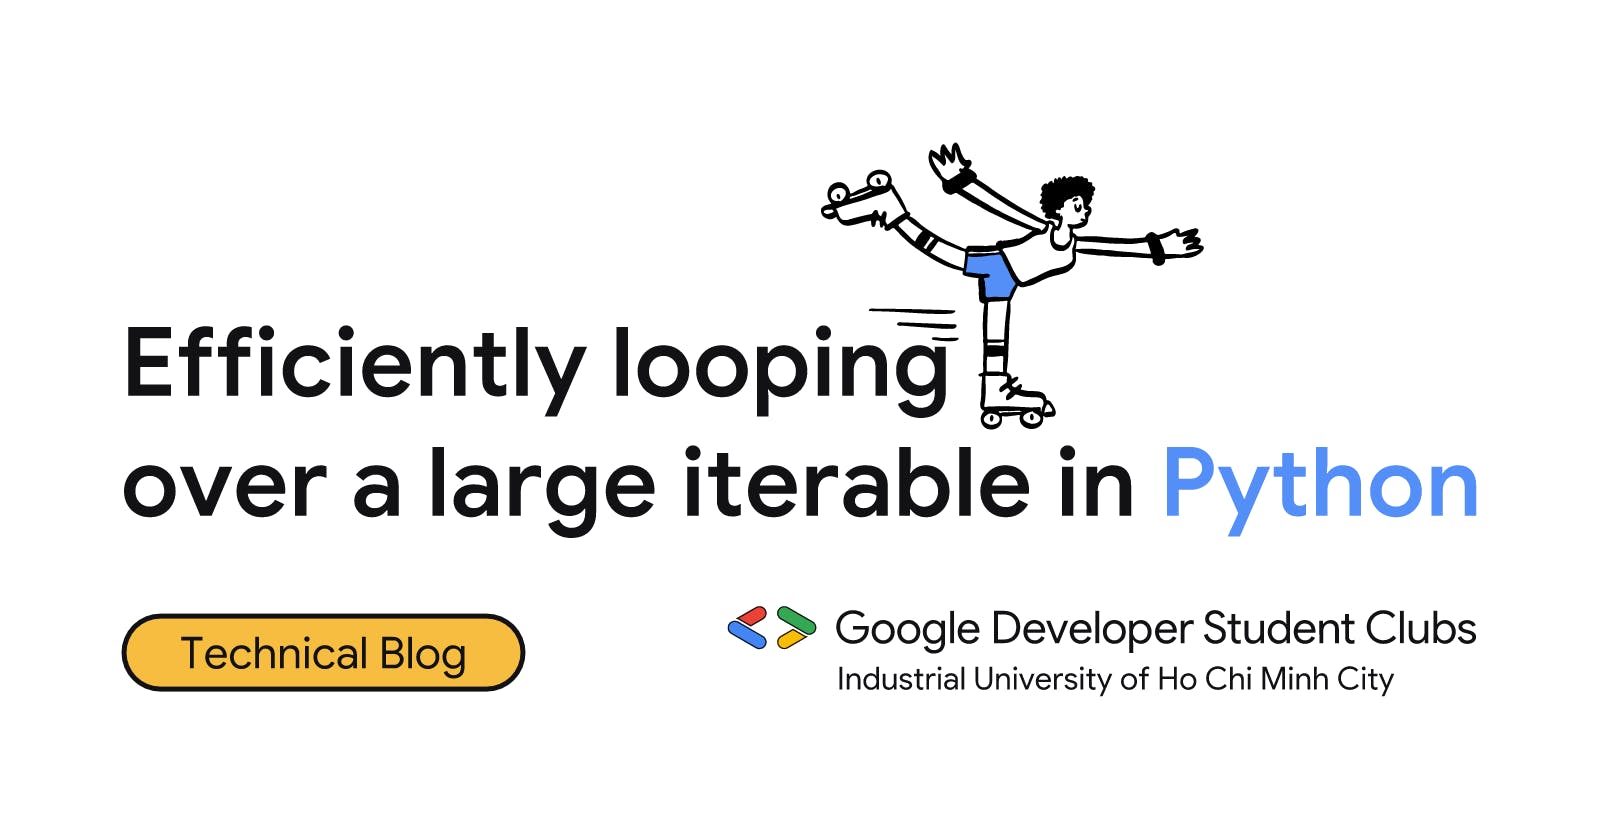 Efficiently looping over a large iterable in Python